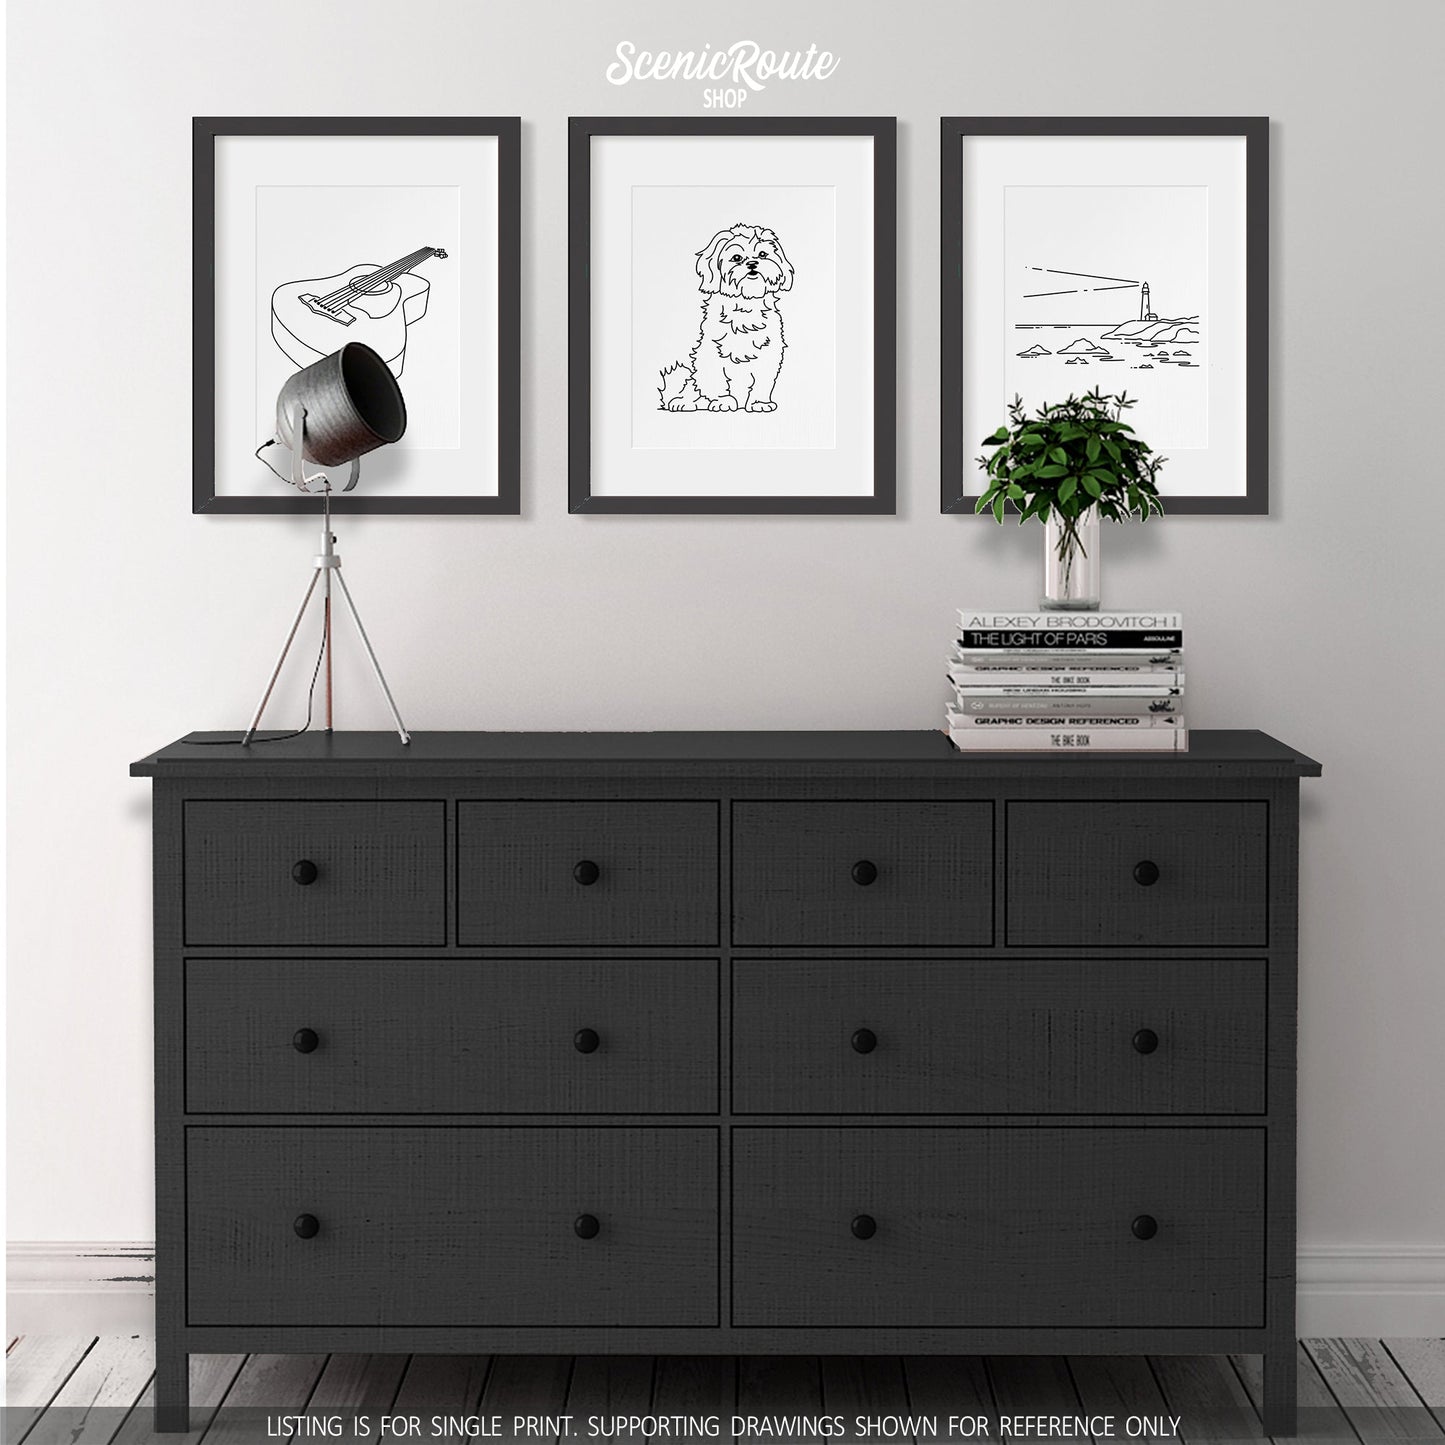 A group of three framed drawings on a white wall above a black dresser. The line art drawings include a Guitar, a Shih Tzu dog, and a Lighthouse